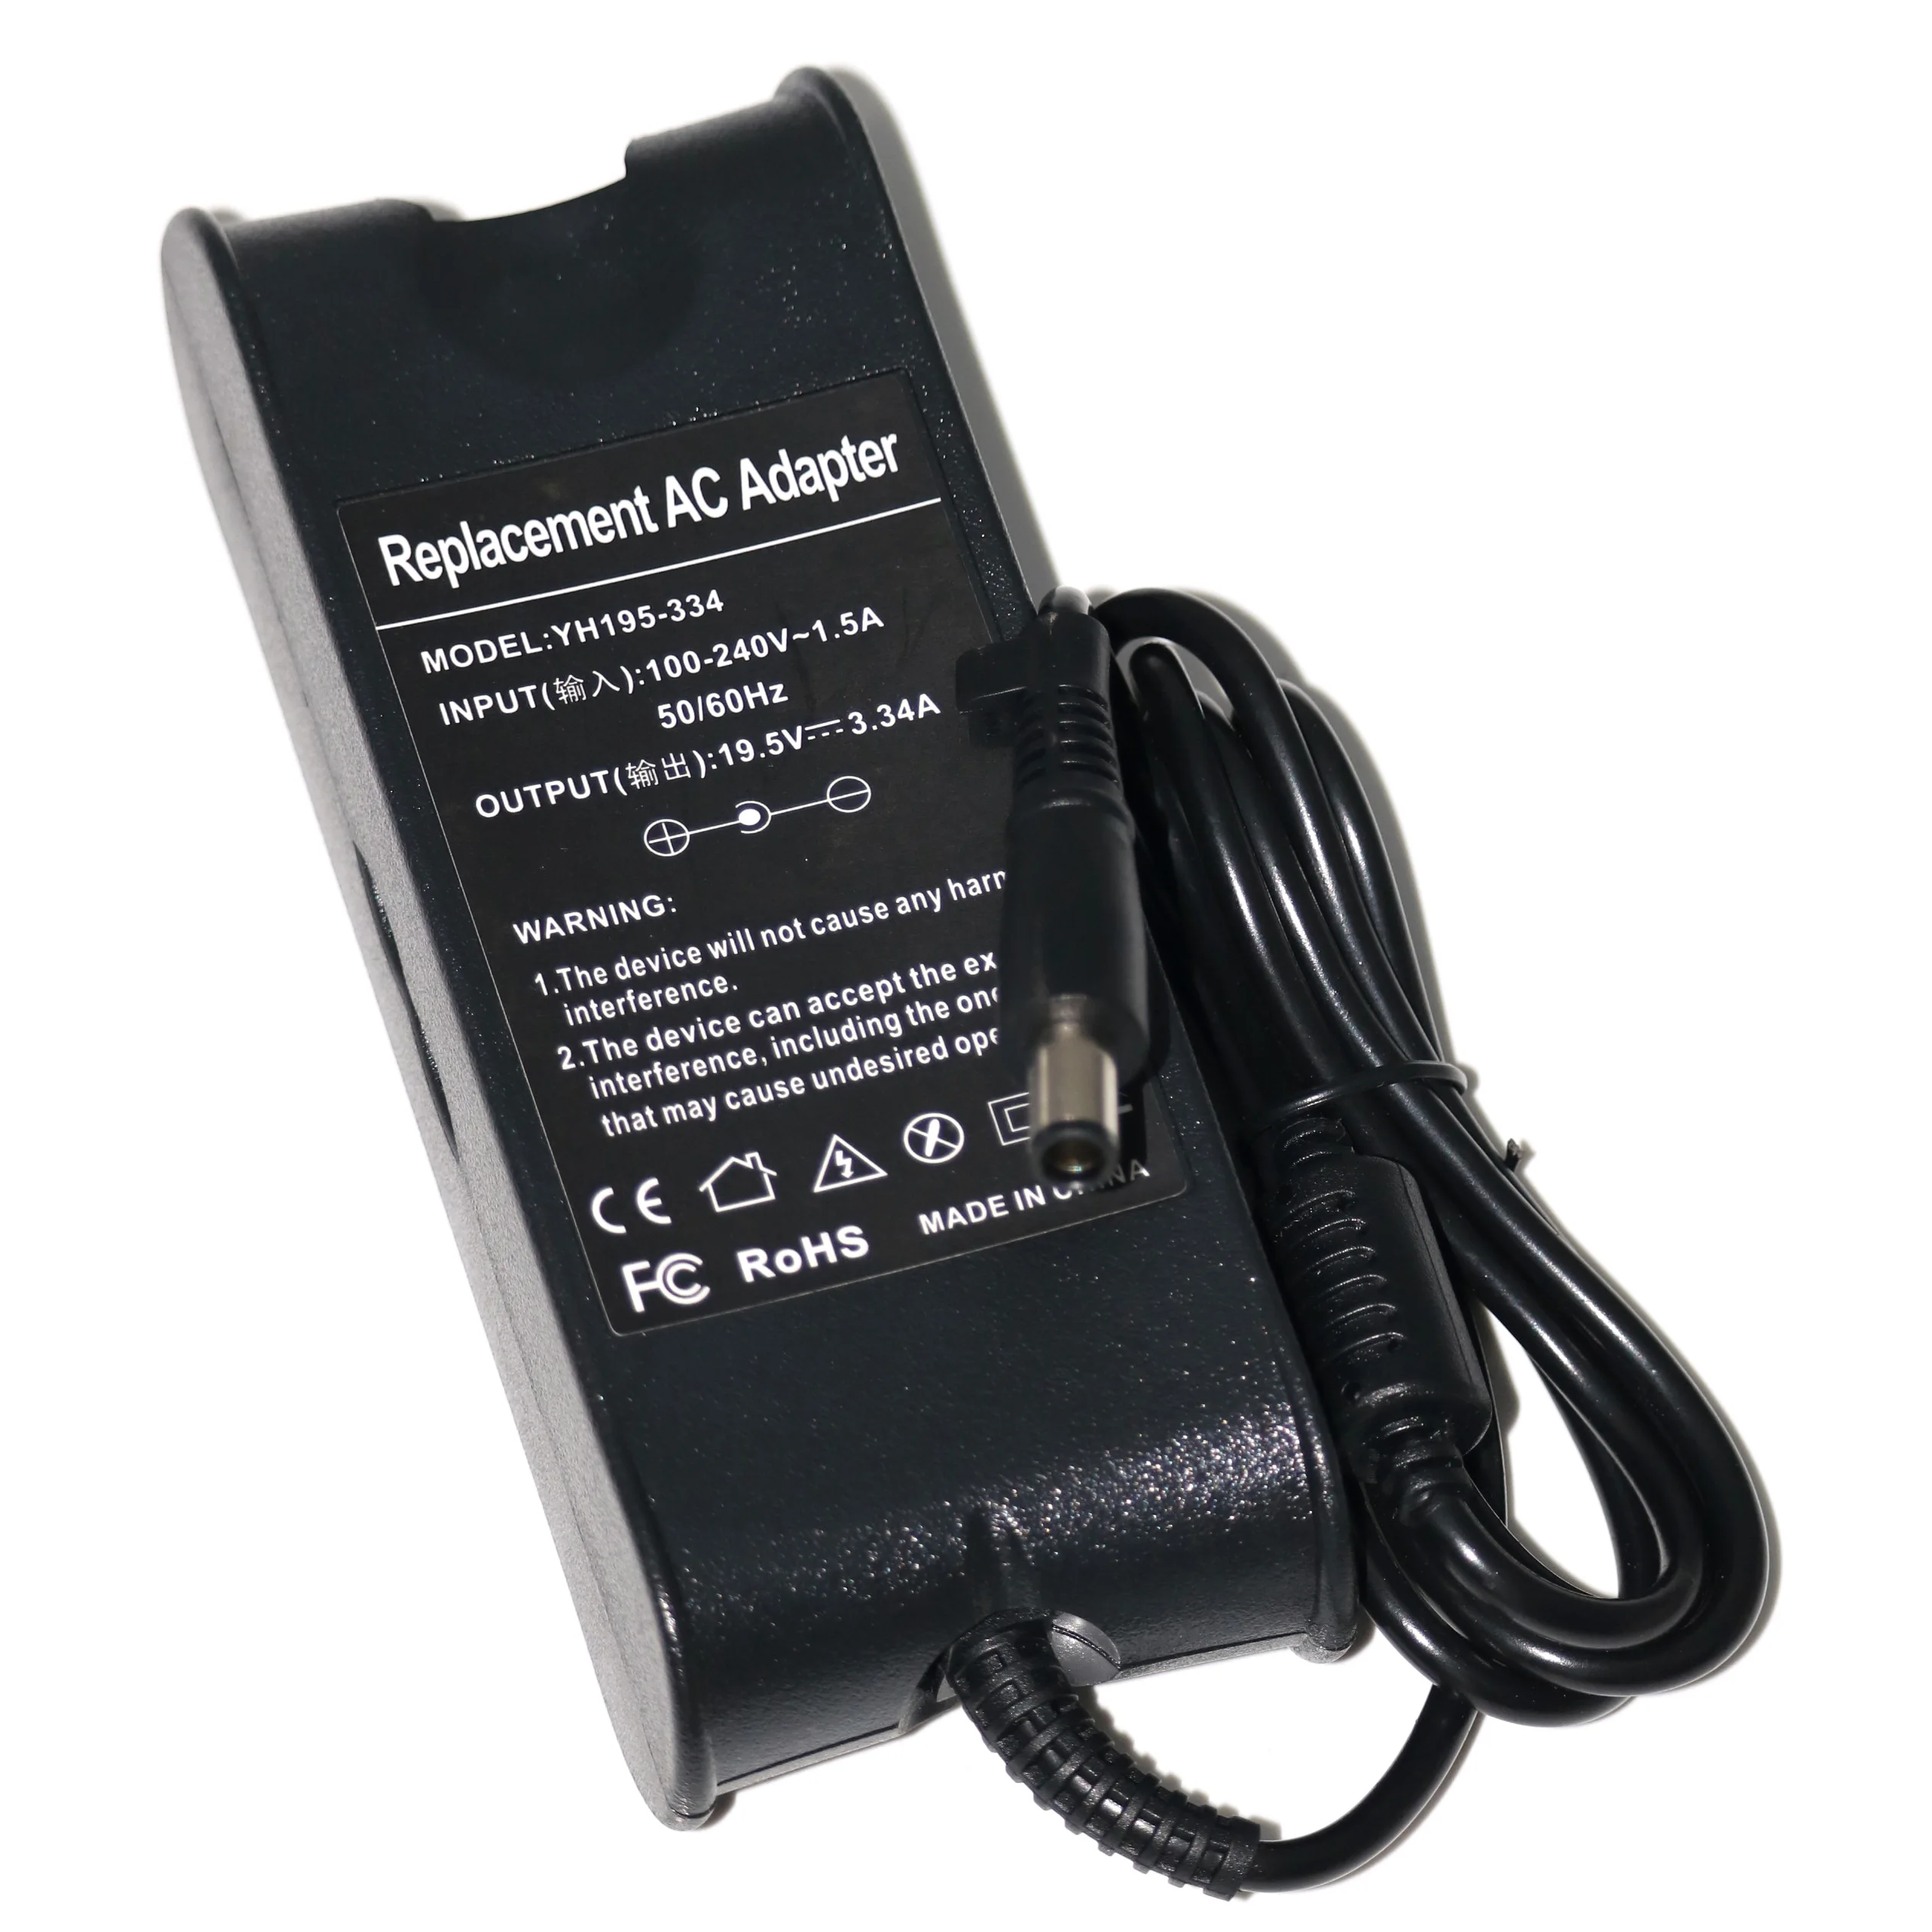 

Laptop adapter for Dell 19.5V 3.34A 65W Power Supply Charger PA-21 for dell Inspiron 15 1545 1750 XPS M1330